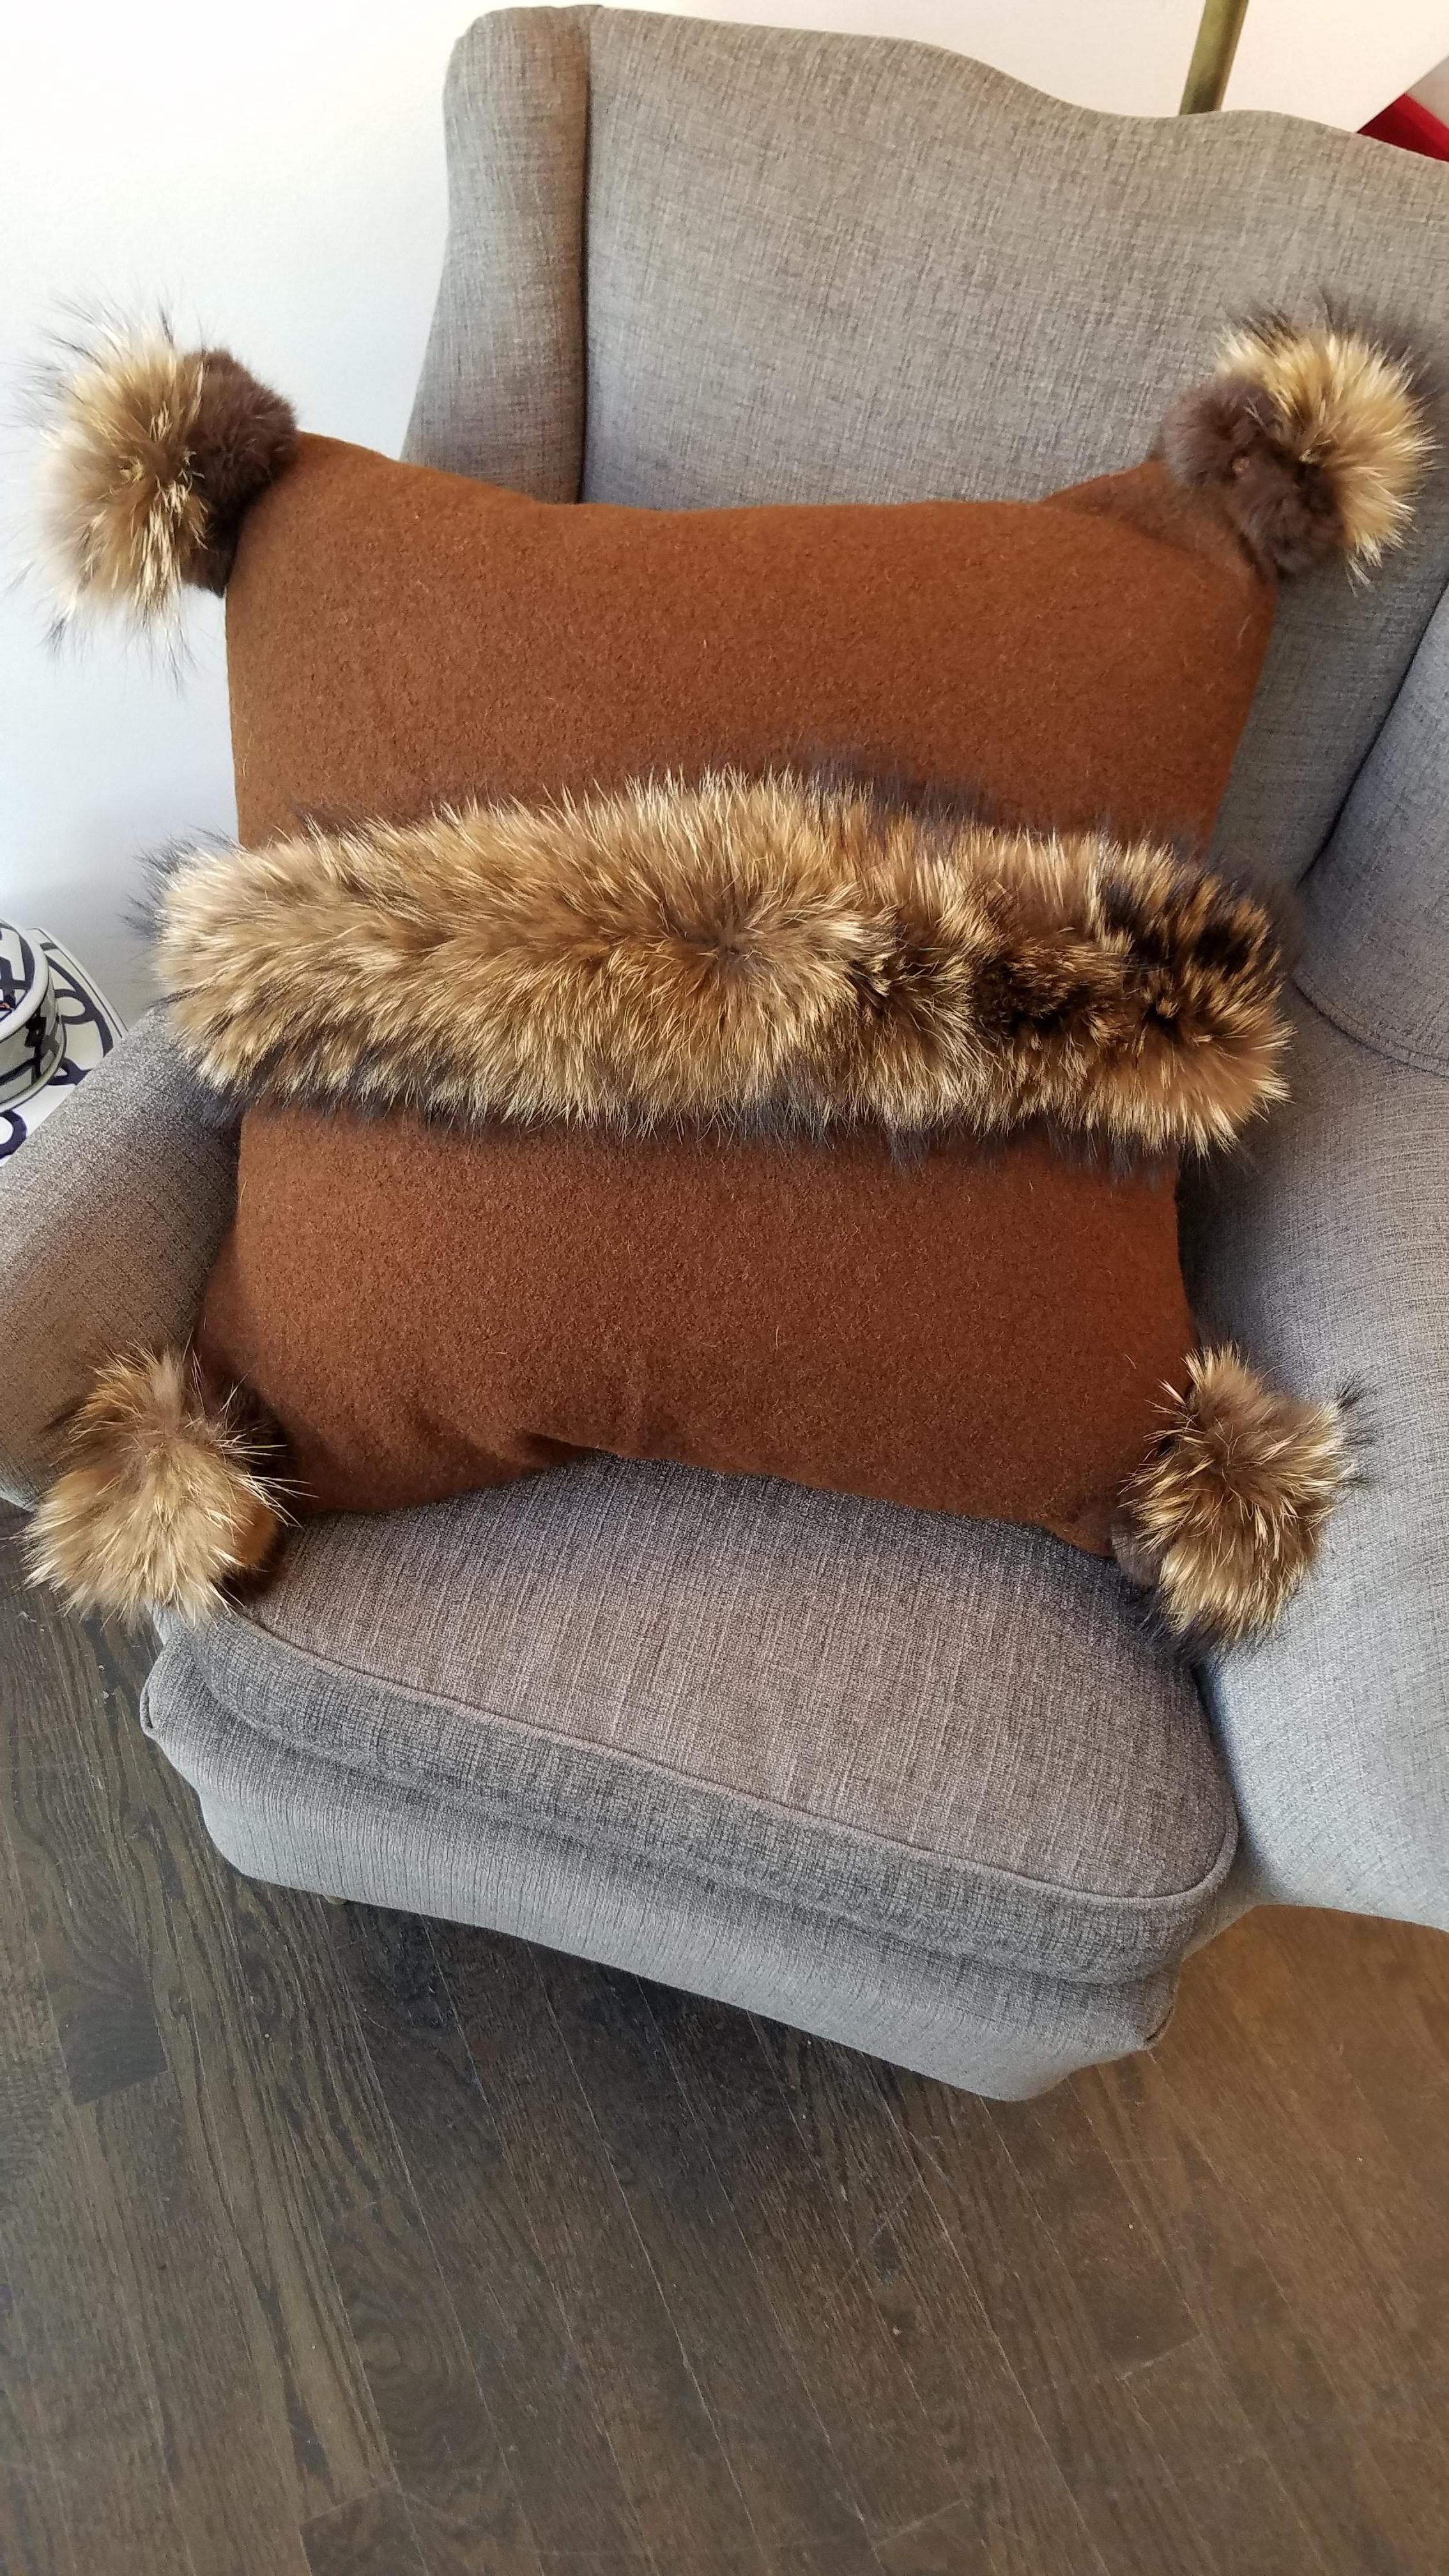 Sophisticated handcrafted pillow with a rich tan Merino wool background accentuated with fur trim. Comes with feather/down insert and concealed zipper. Made in Italy.